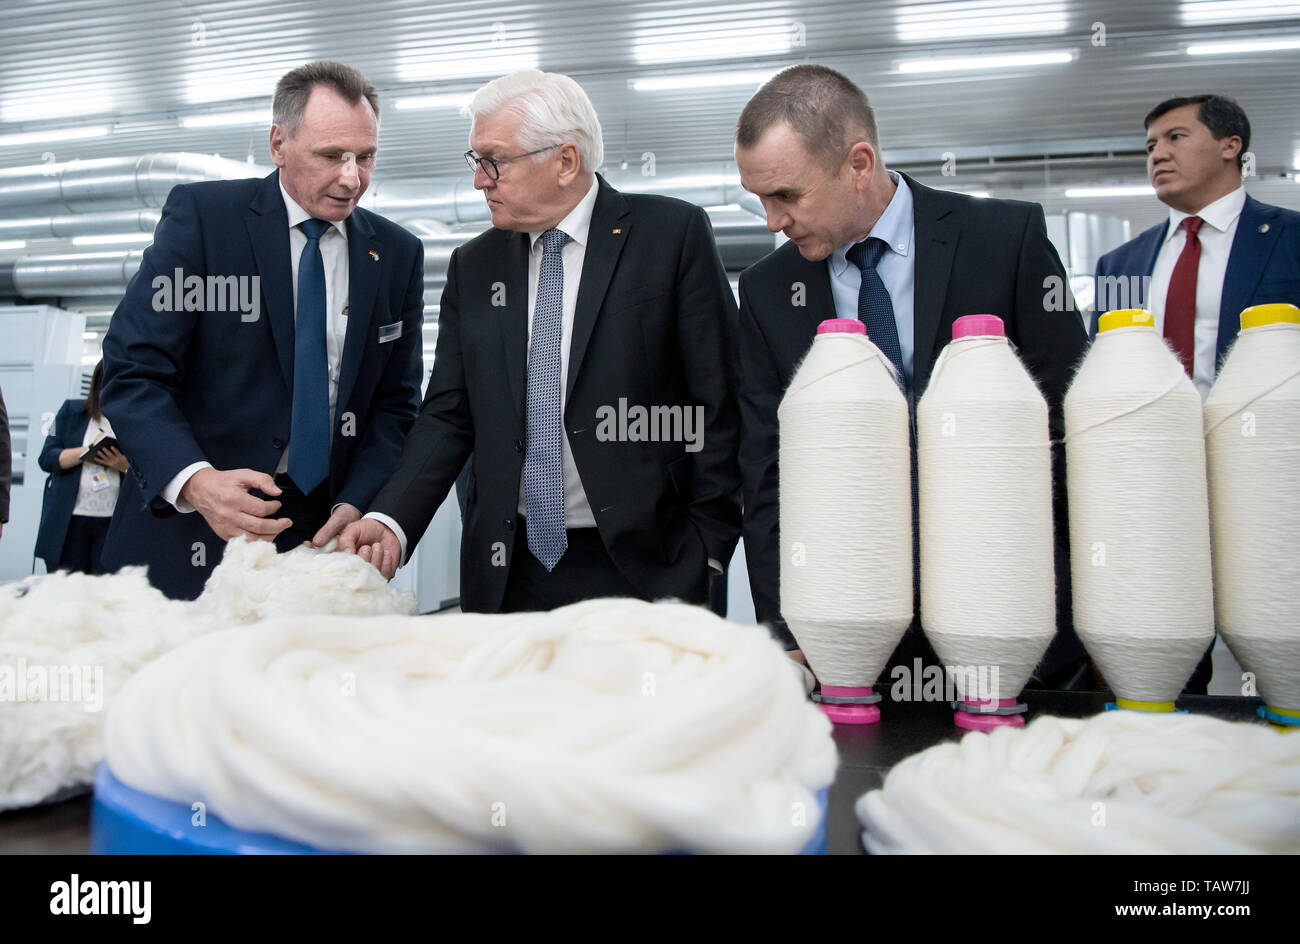 Taschkent, Uzbekistan. 28th May, 2019. Federal President Frank-Walter Steinmeier (M) visits the Bakan Tex yarn spinning mill and is guided through the production facilities by Witali Schulz (l), Regional Manager of Trützschler Textilmaschinenfabrik, and General Director Botir Muchitdinow (r). President Steinmeier and his wife are on a two-day state visit to Uzbekistan. They are accompanied by numerous business representatives and cultural workers. Credit: Bernd von Jutrczenka/dpa/Alamy Live News Stock Photo